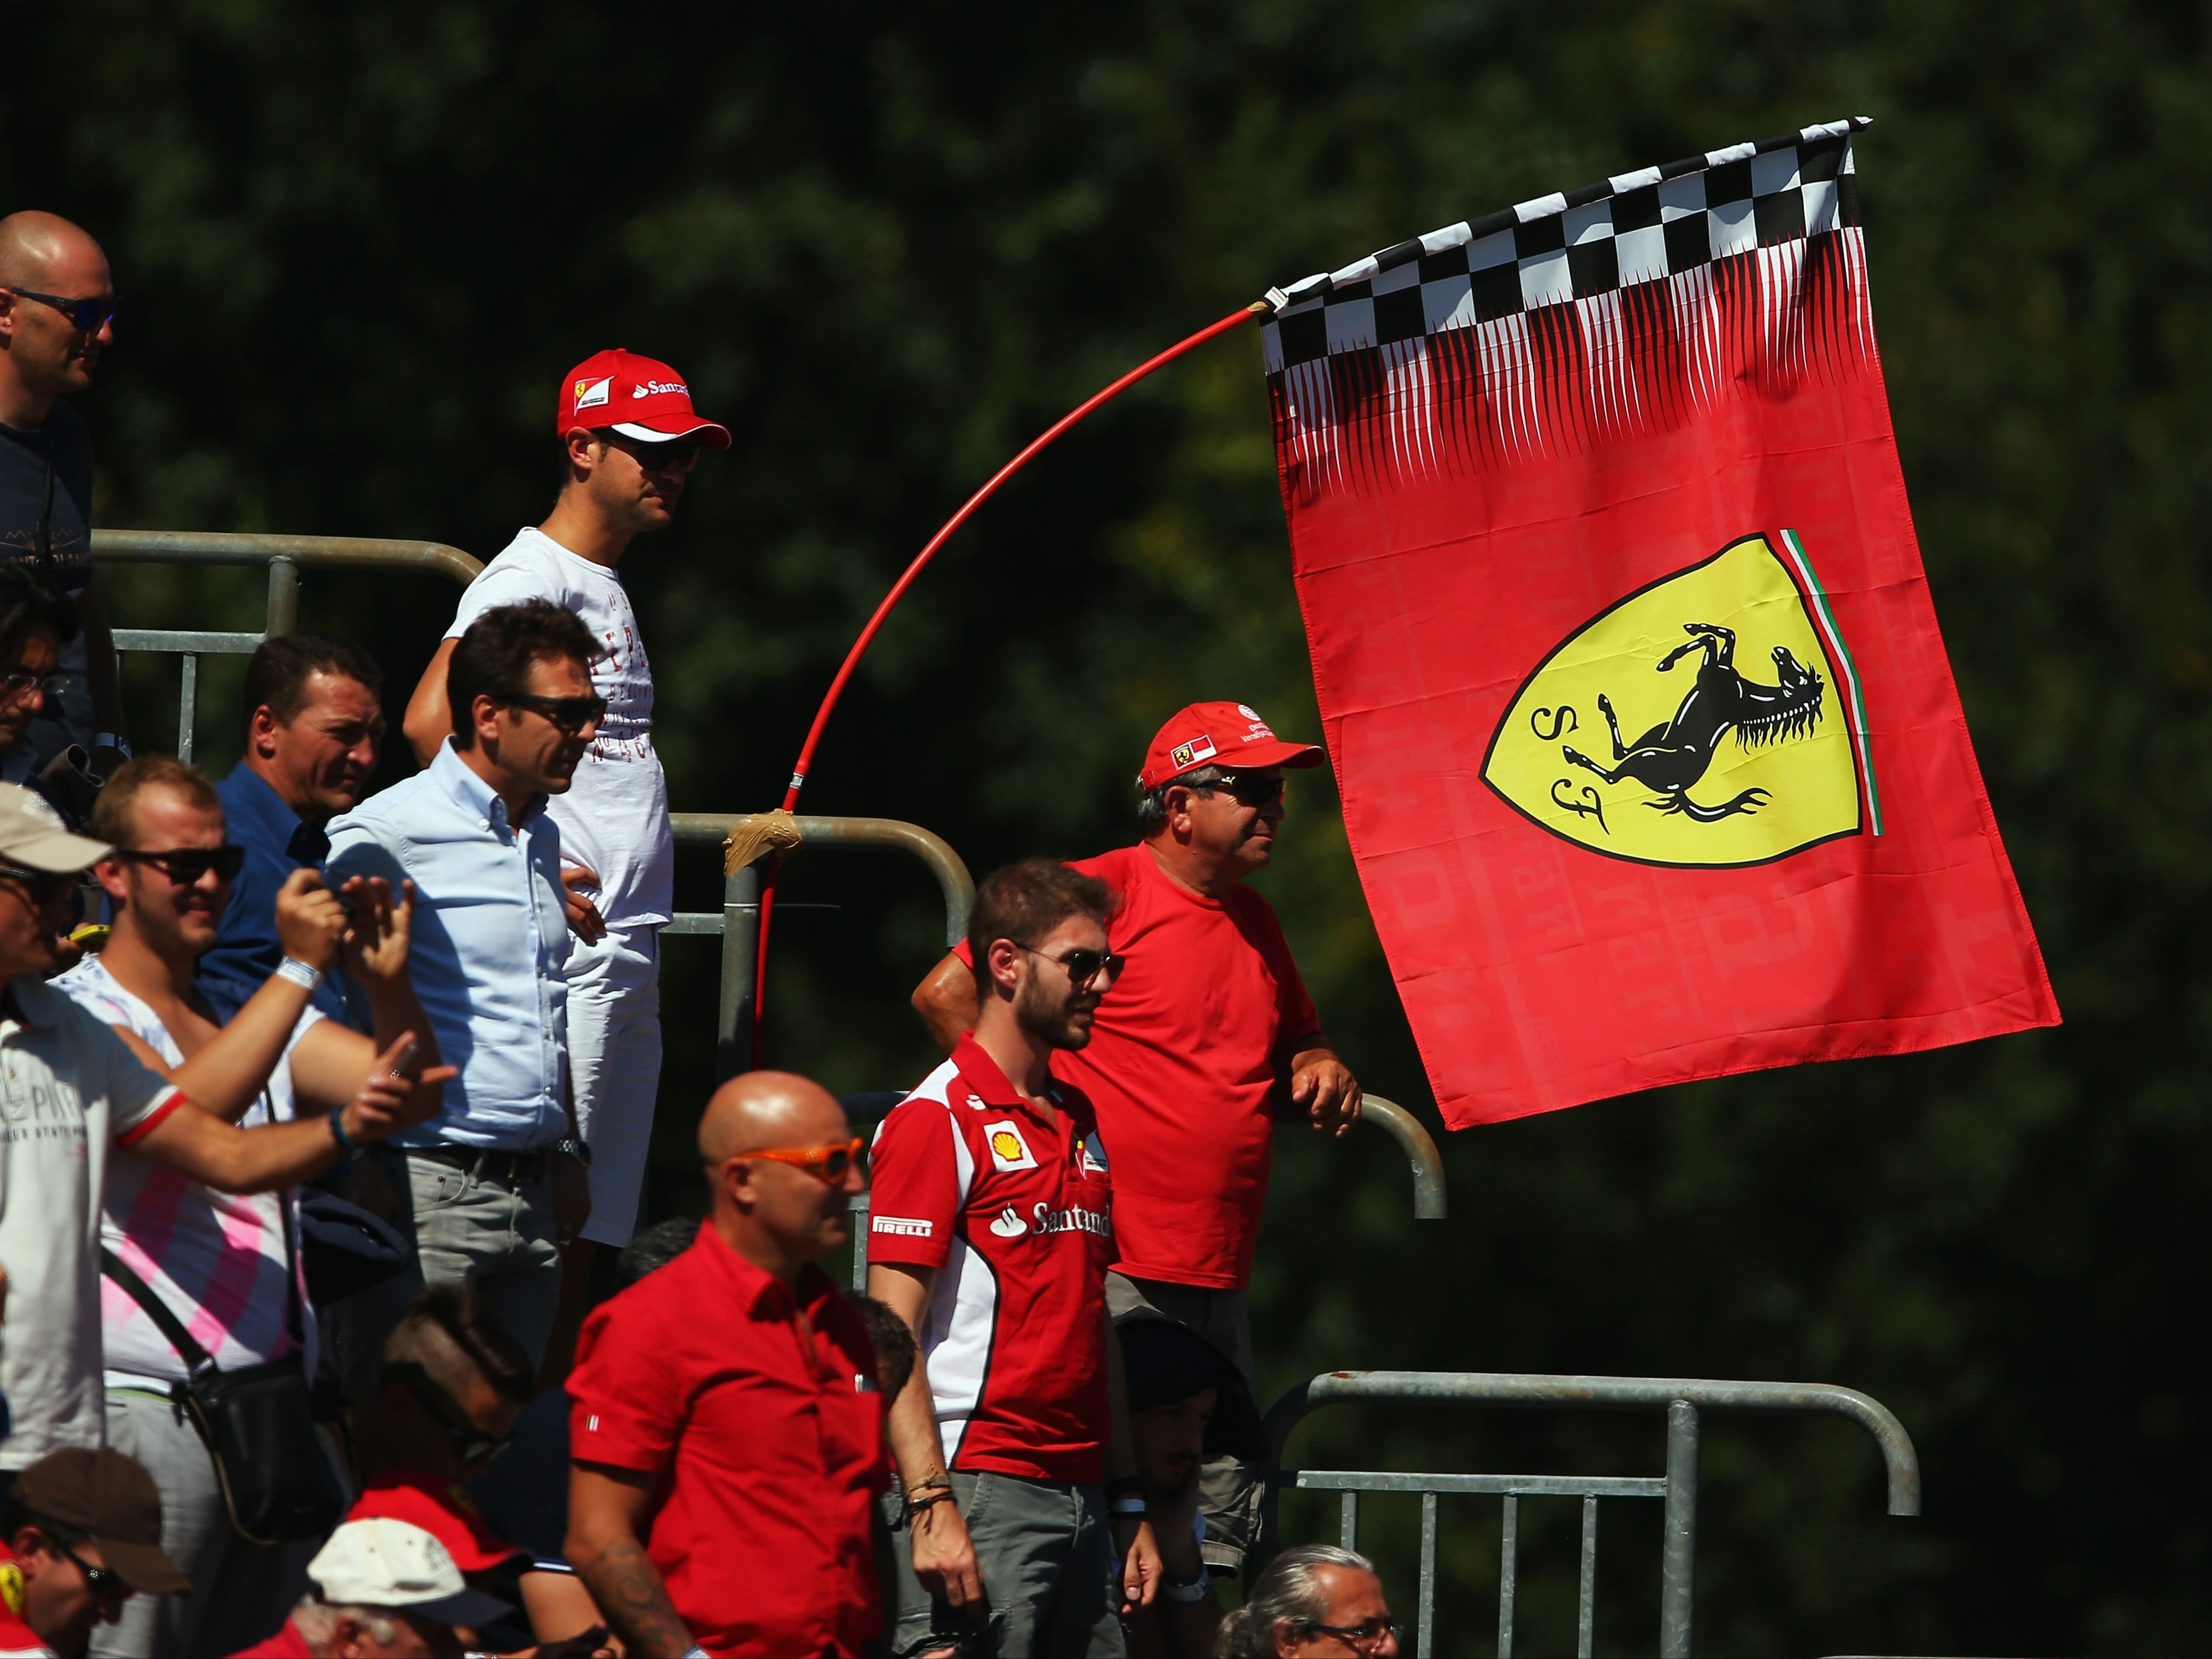 Ferrari fans fly flags in support of their team during the 2015 F1 Italian Grand Prix. (Photo by Bryn Lennon/Getty Images)